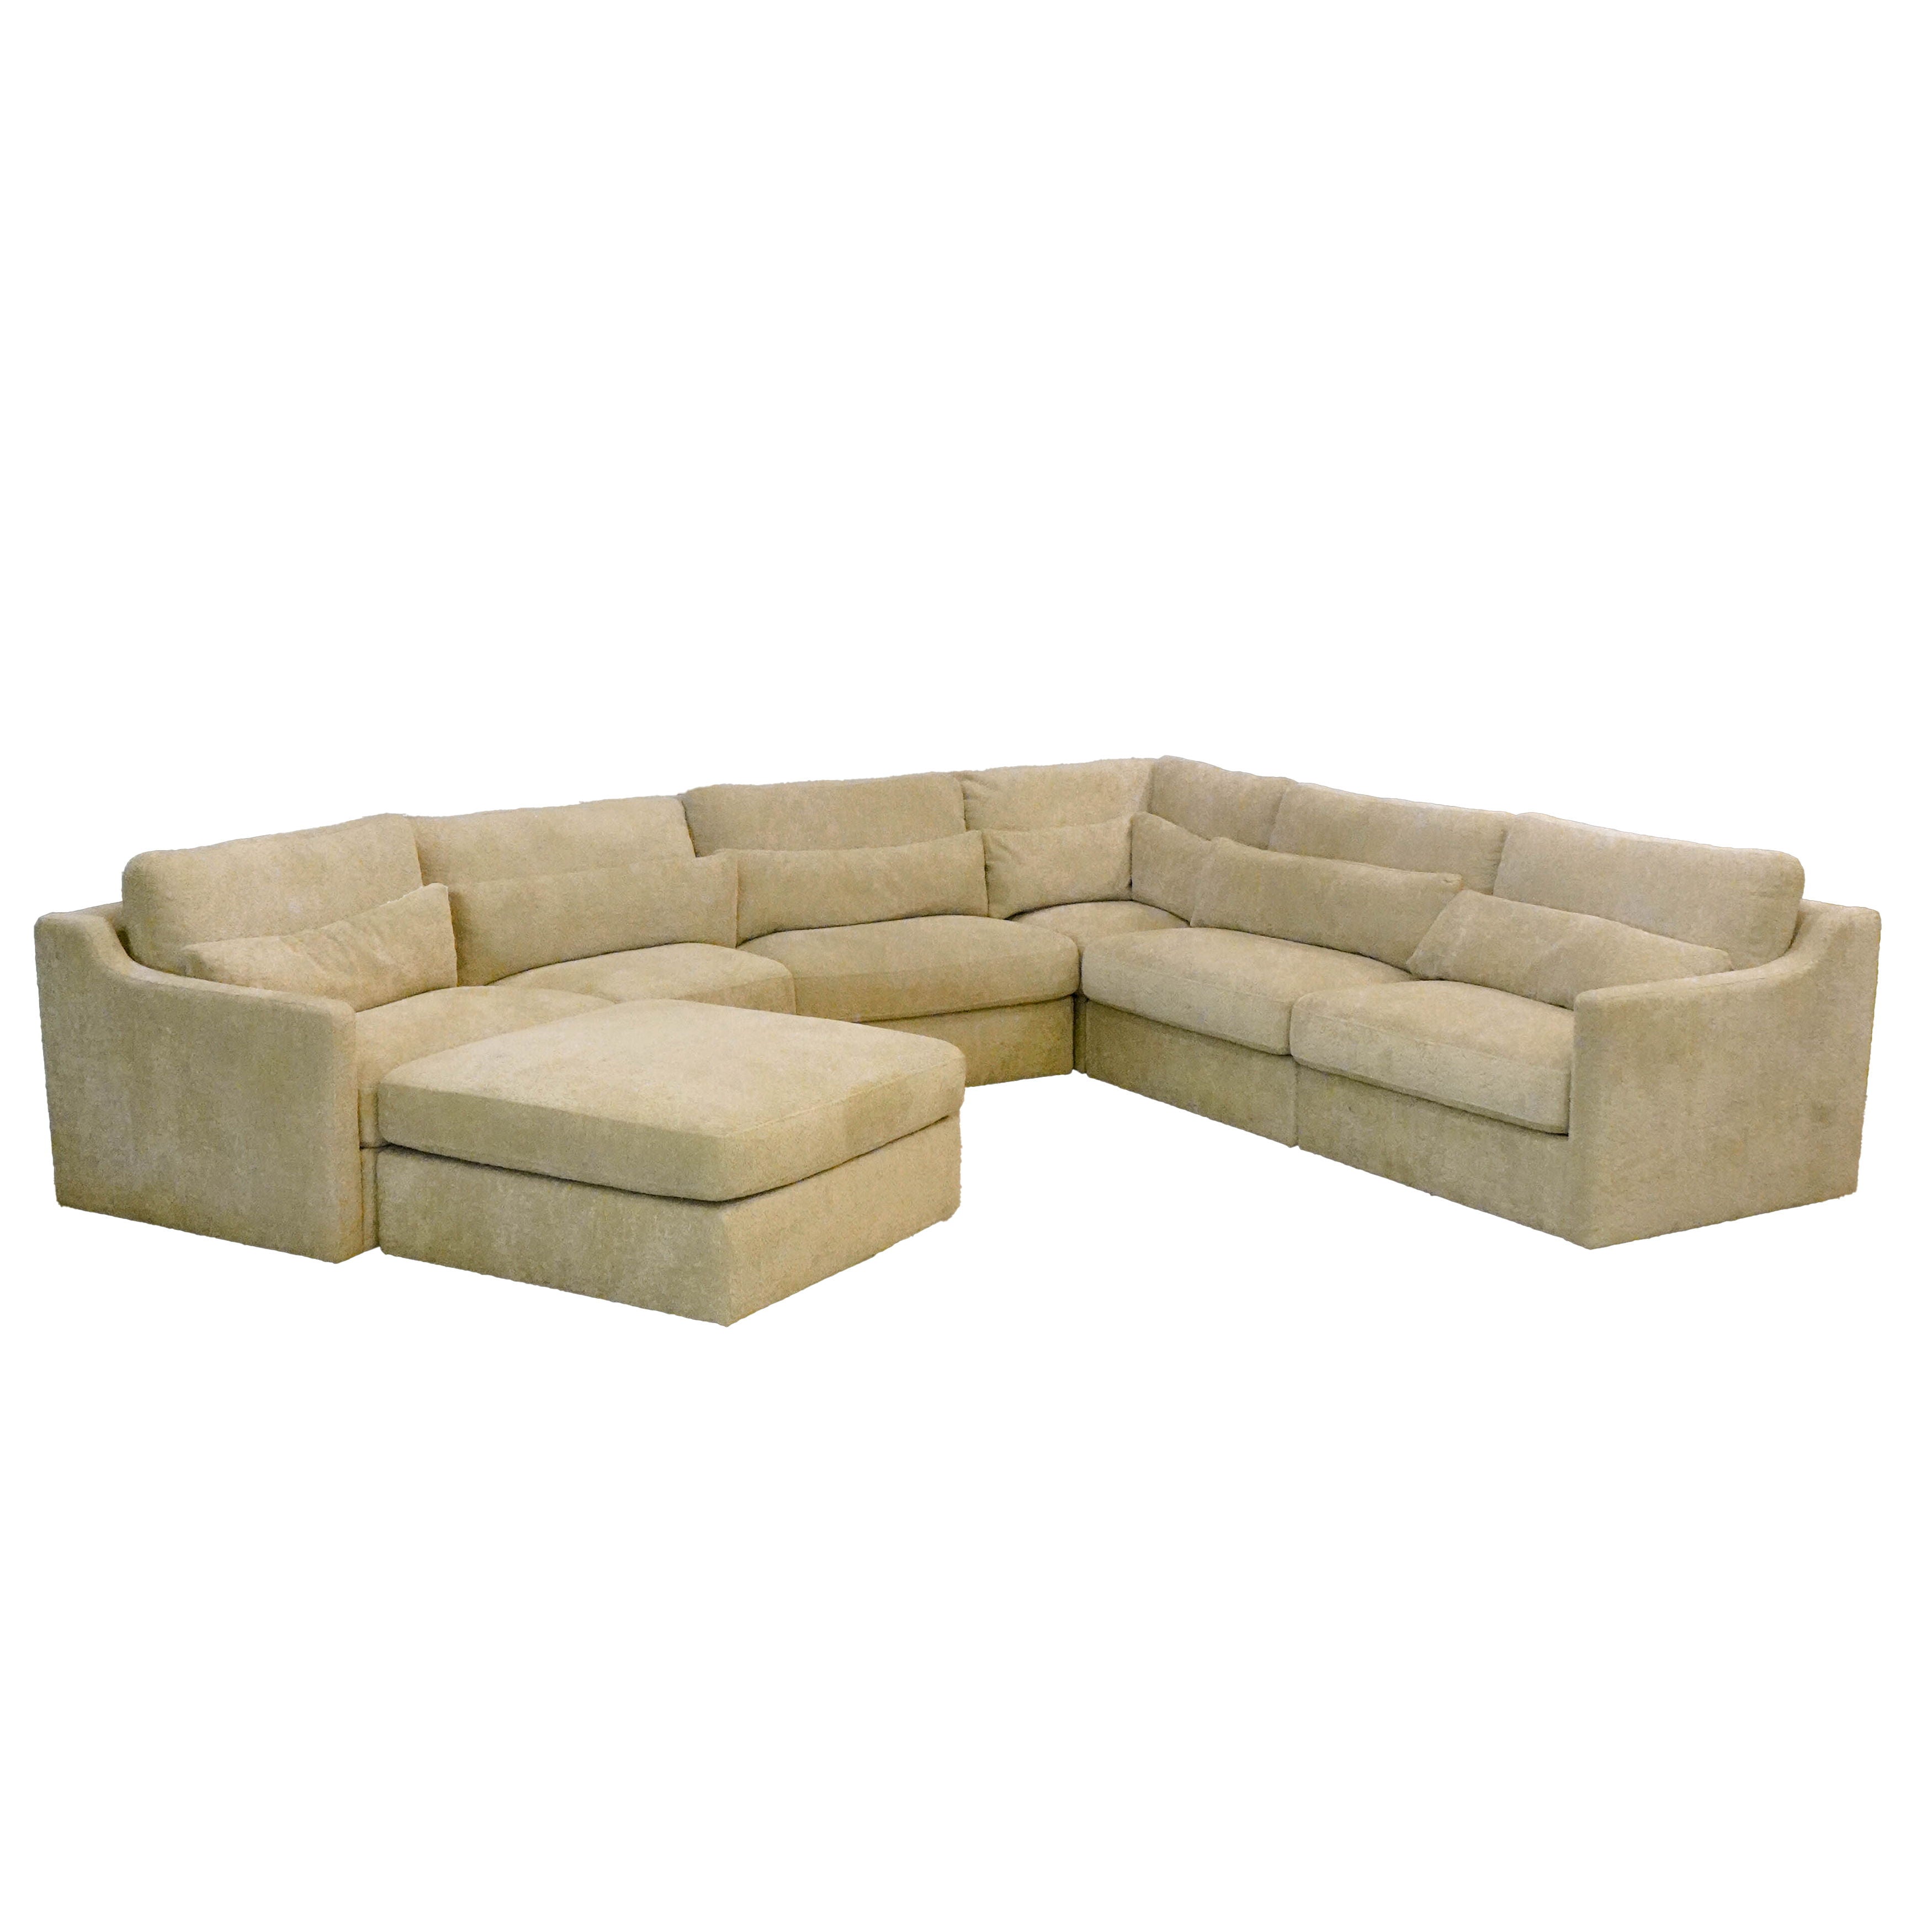 Hampshire Unbleached - Linen Modular Sectional